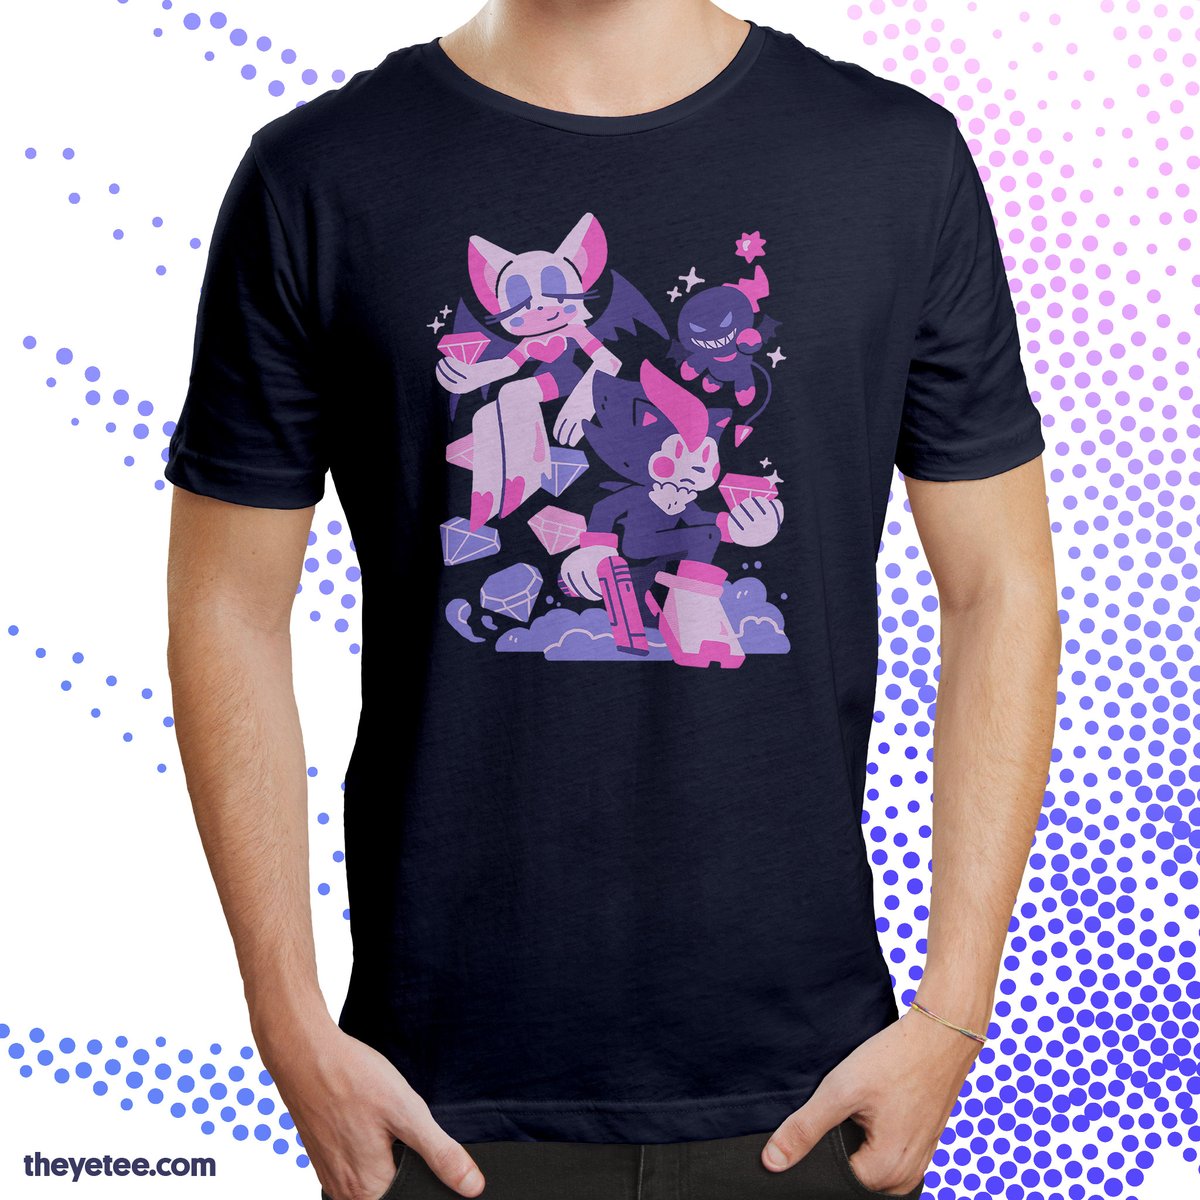 「Going rogue, beyond a shadow of a doubt!」|The Yetee 🌈のイラスト